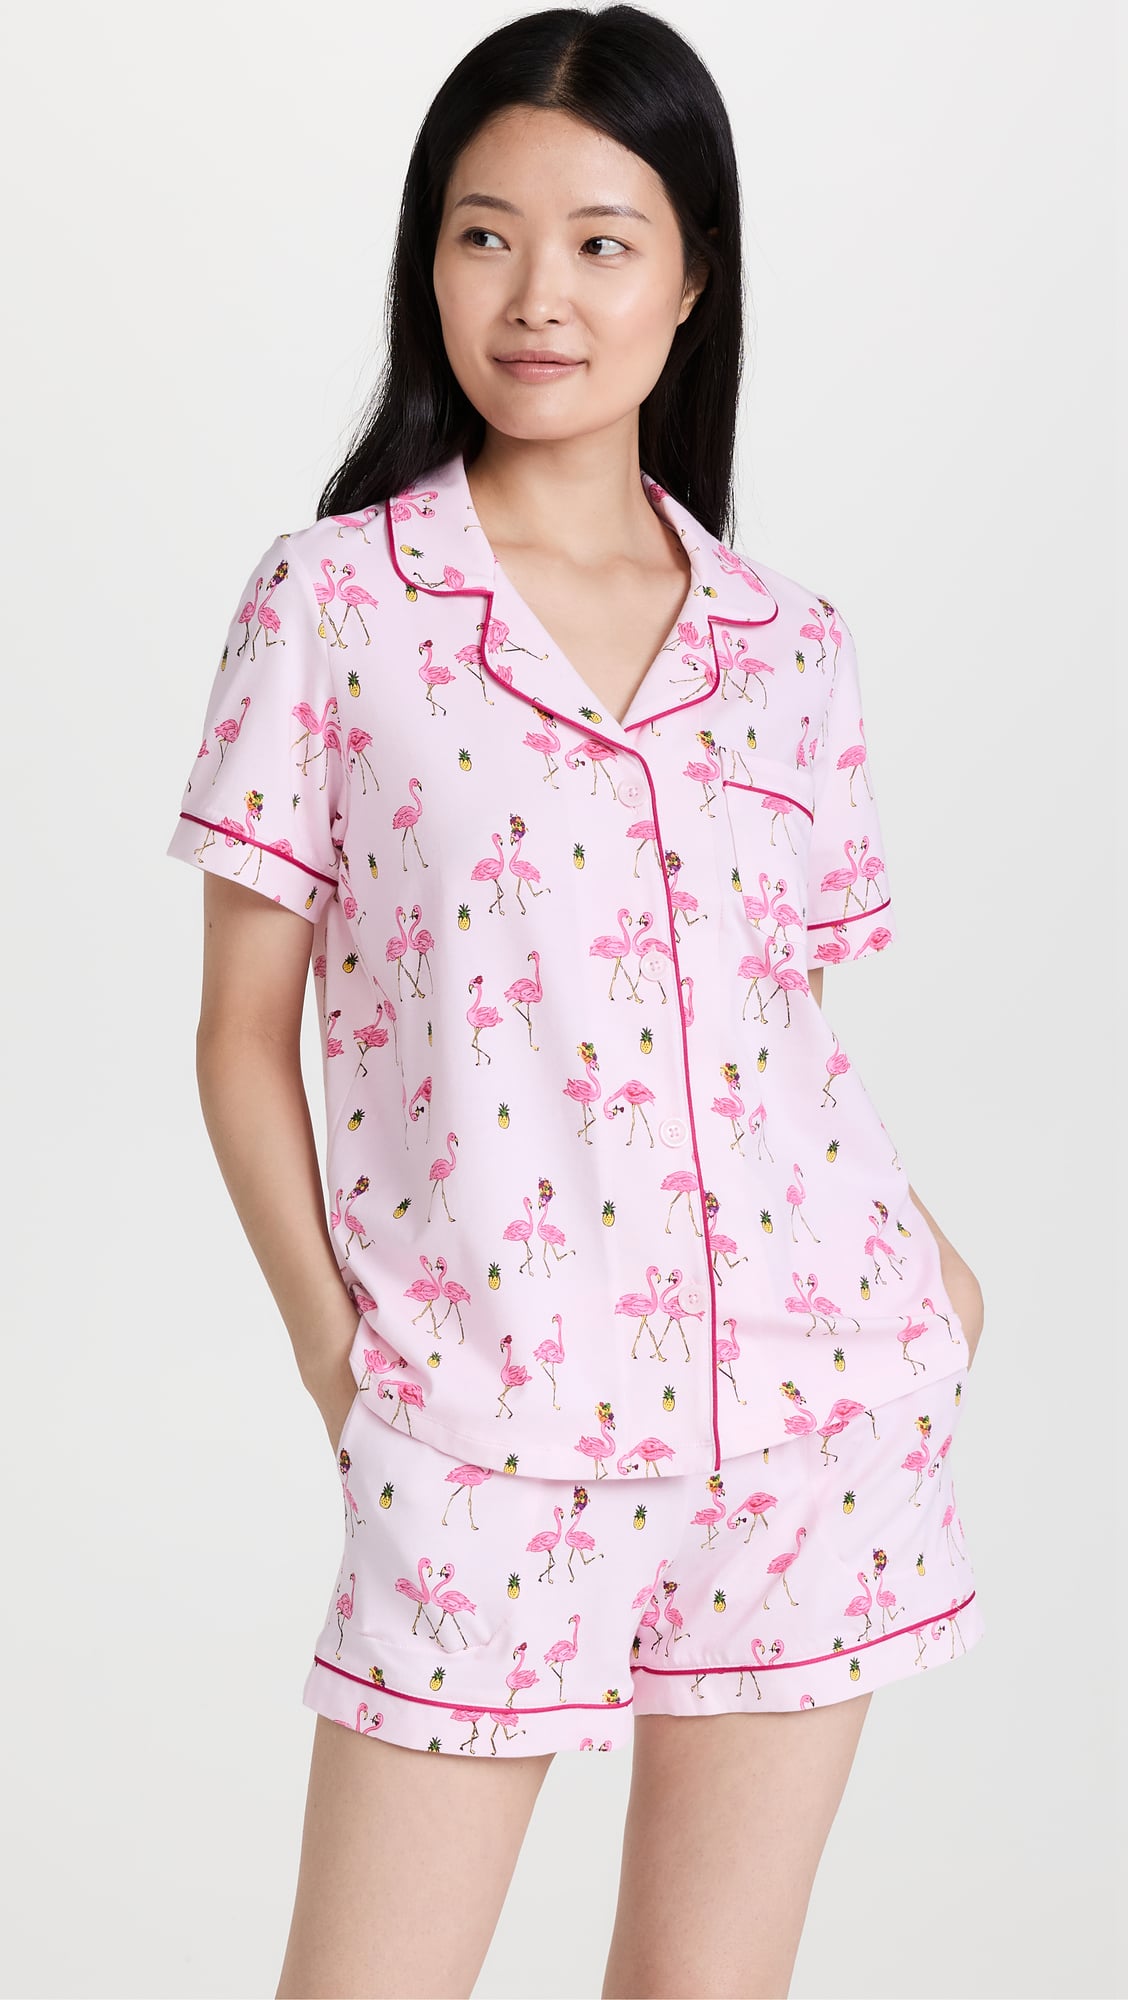 5 of the Best Pairs of Summer Pajamas for Women